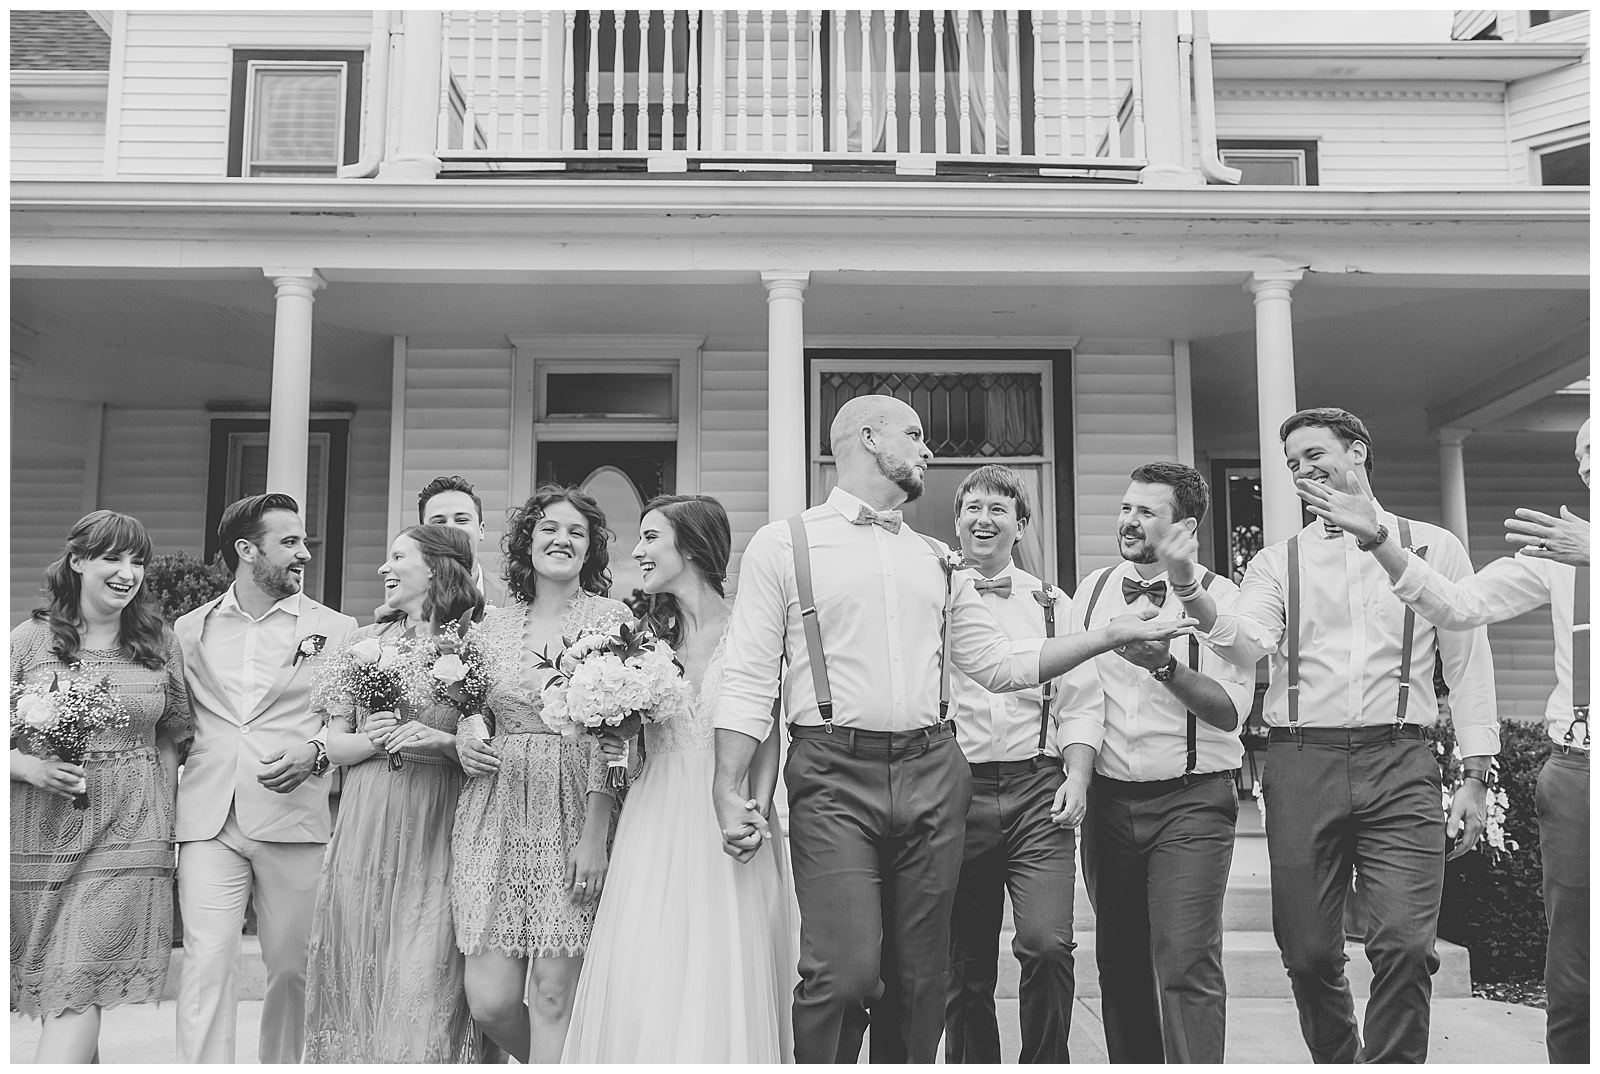 Wedding photography and videography at Eighteen Ninety in Platte City, Missouri, by Kansas City wedding photographers Wisdom-Watson Weddings.